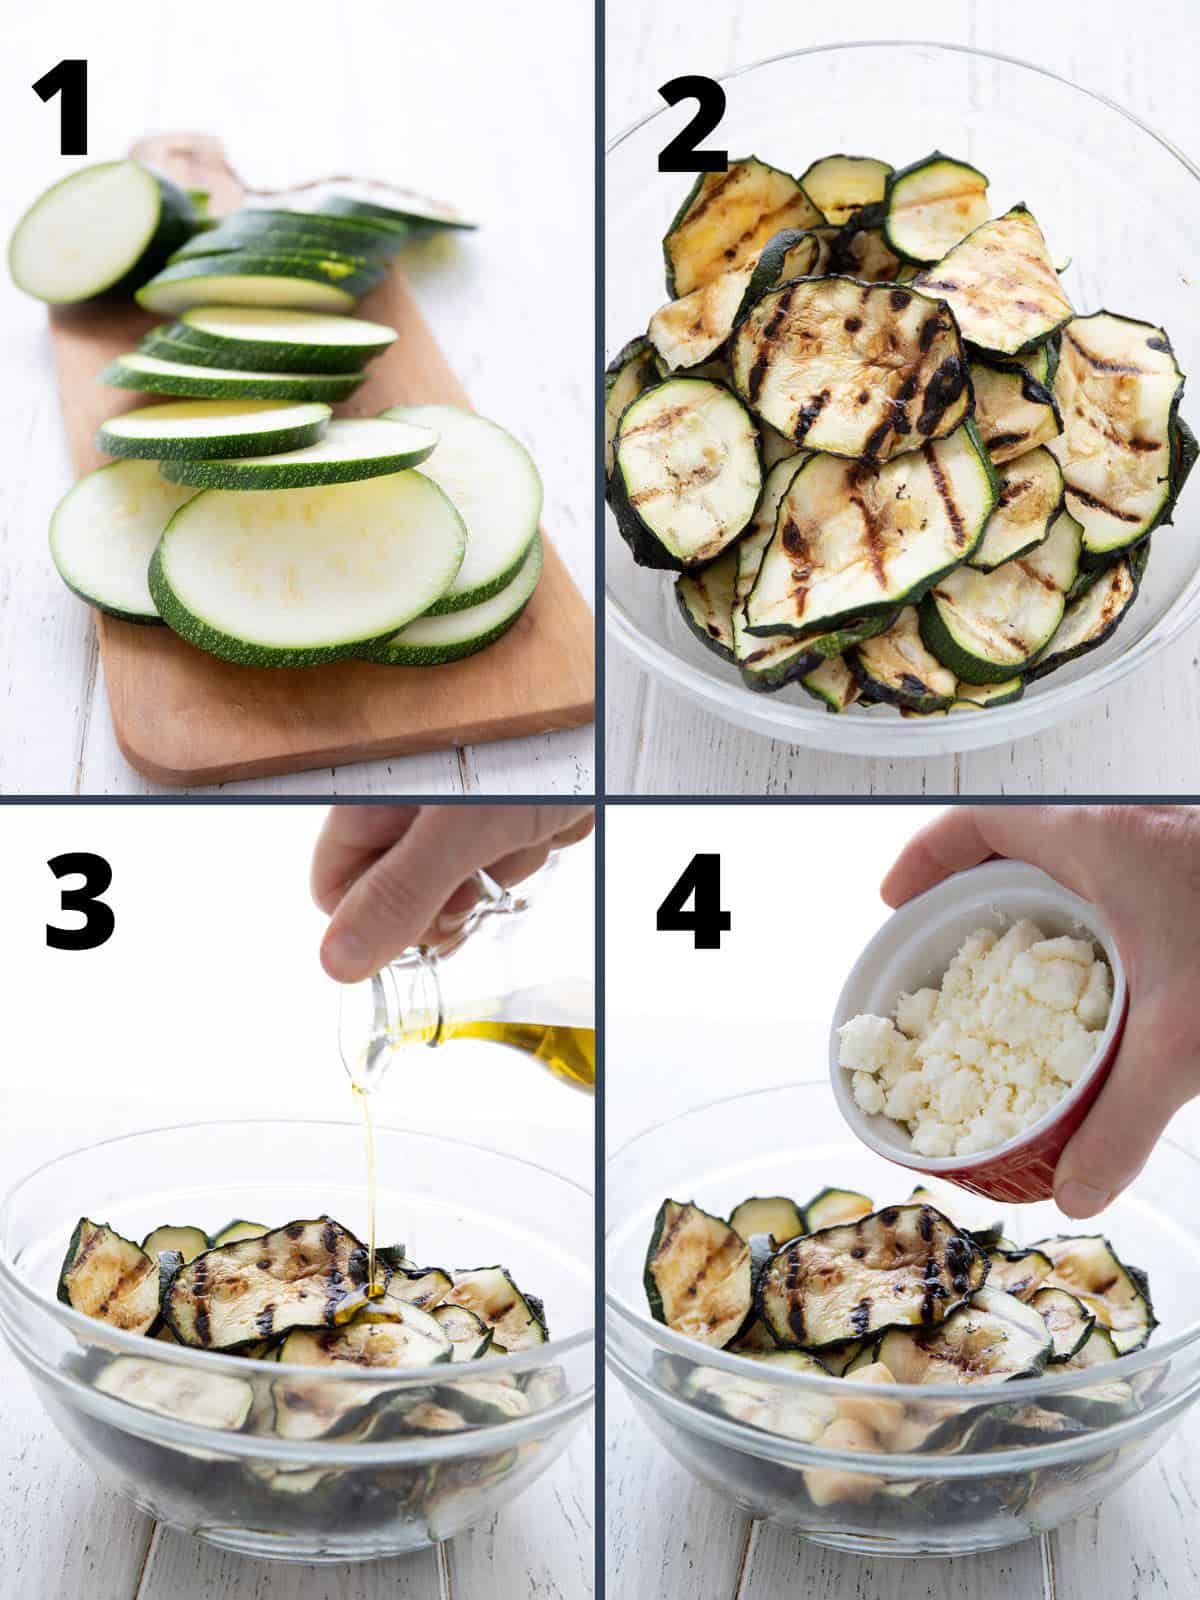 A collage of 4 images showing the steps for making perfect grilled zucchini.